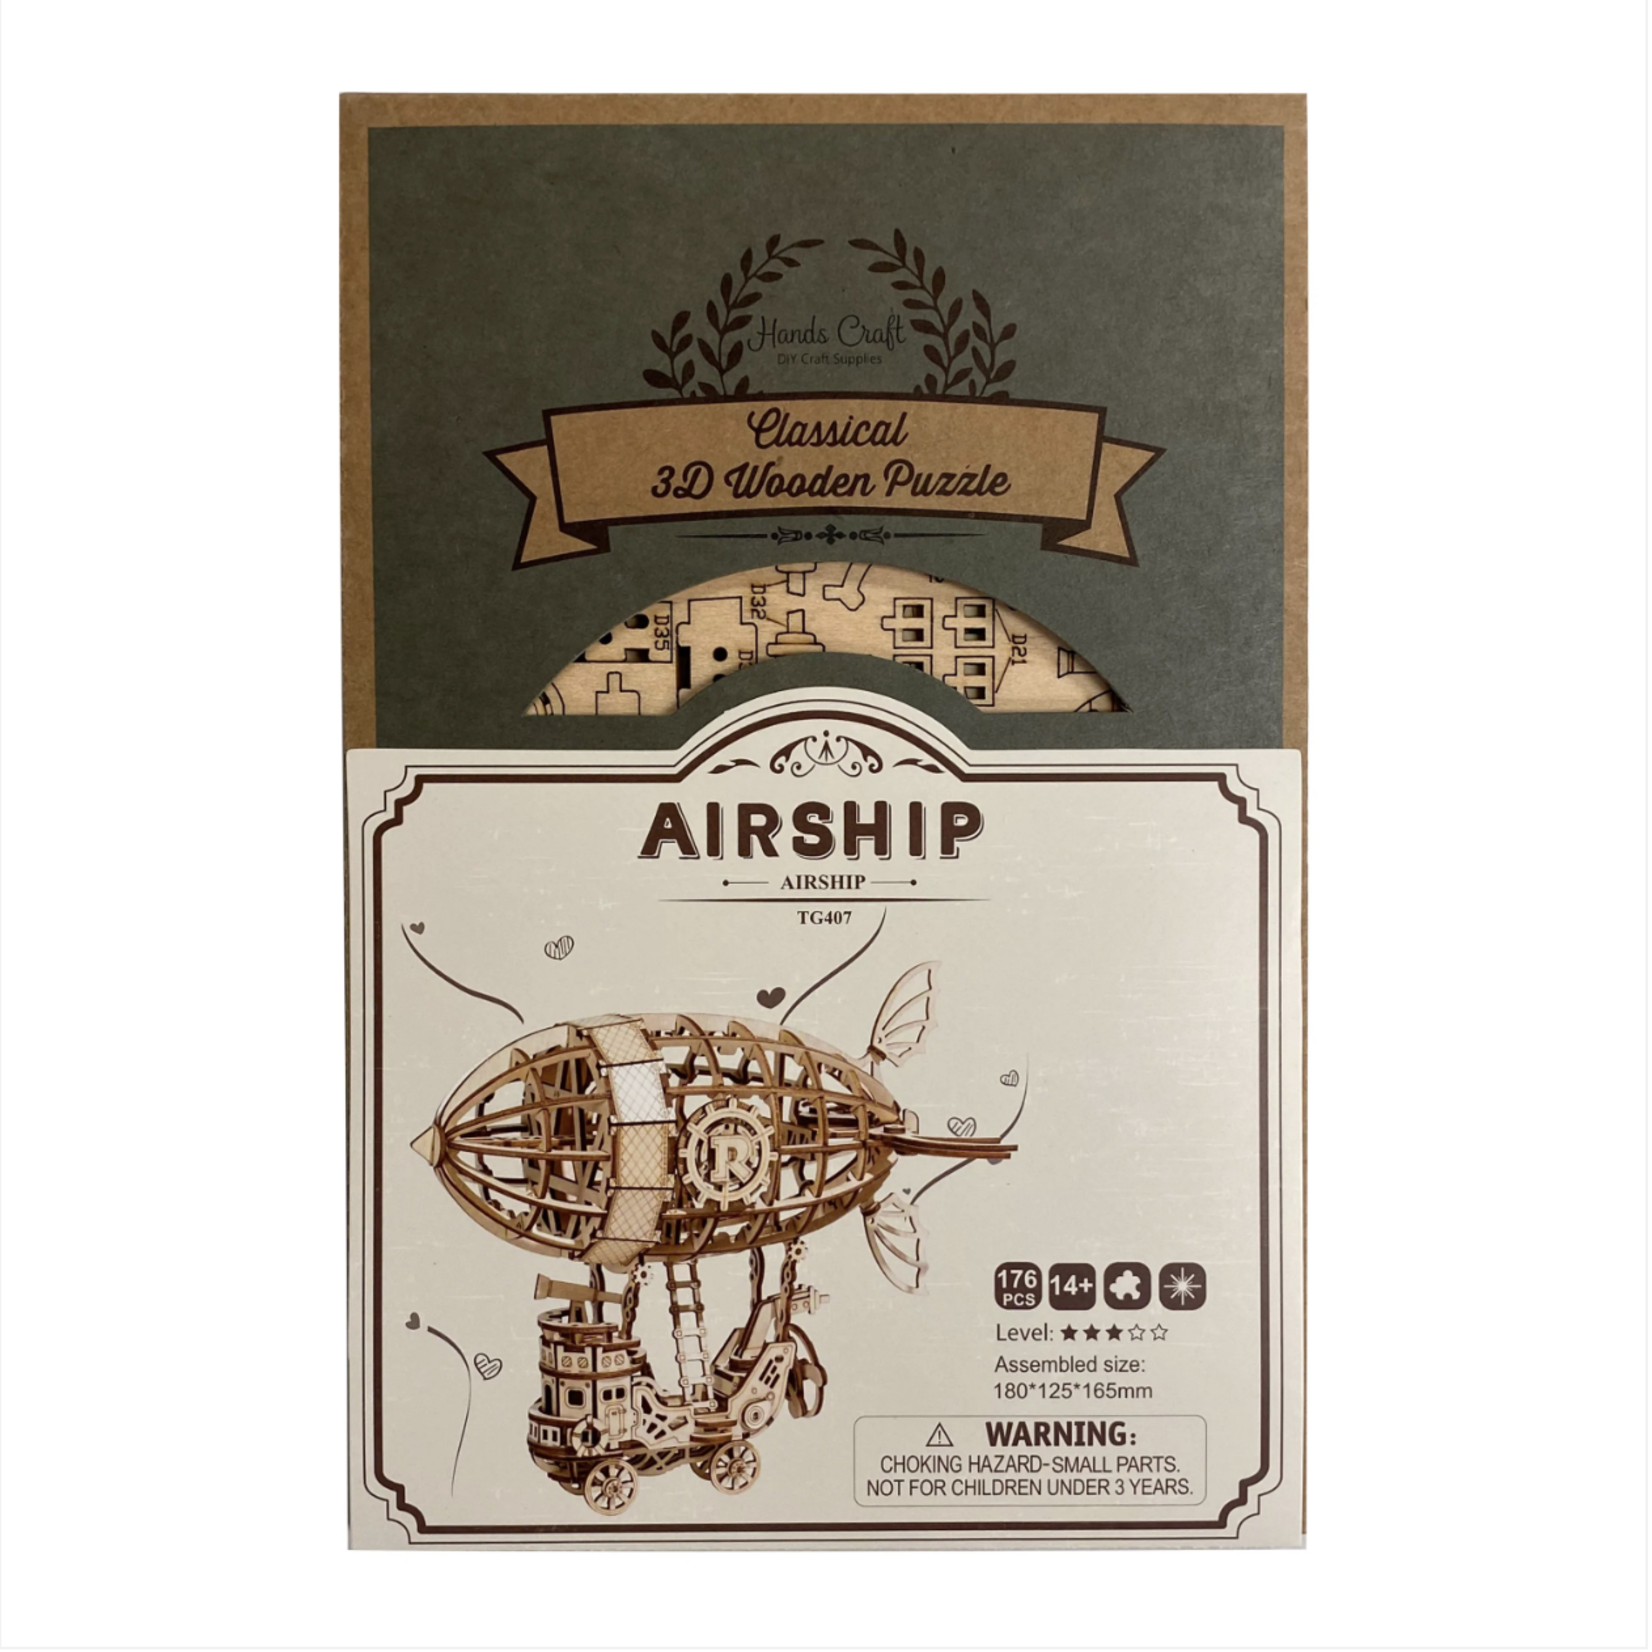 HANDS CRAFT CLASSICAL 3D WOODEN PUZZLE AIRSHIP